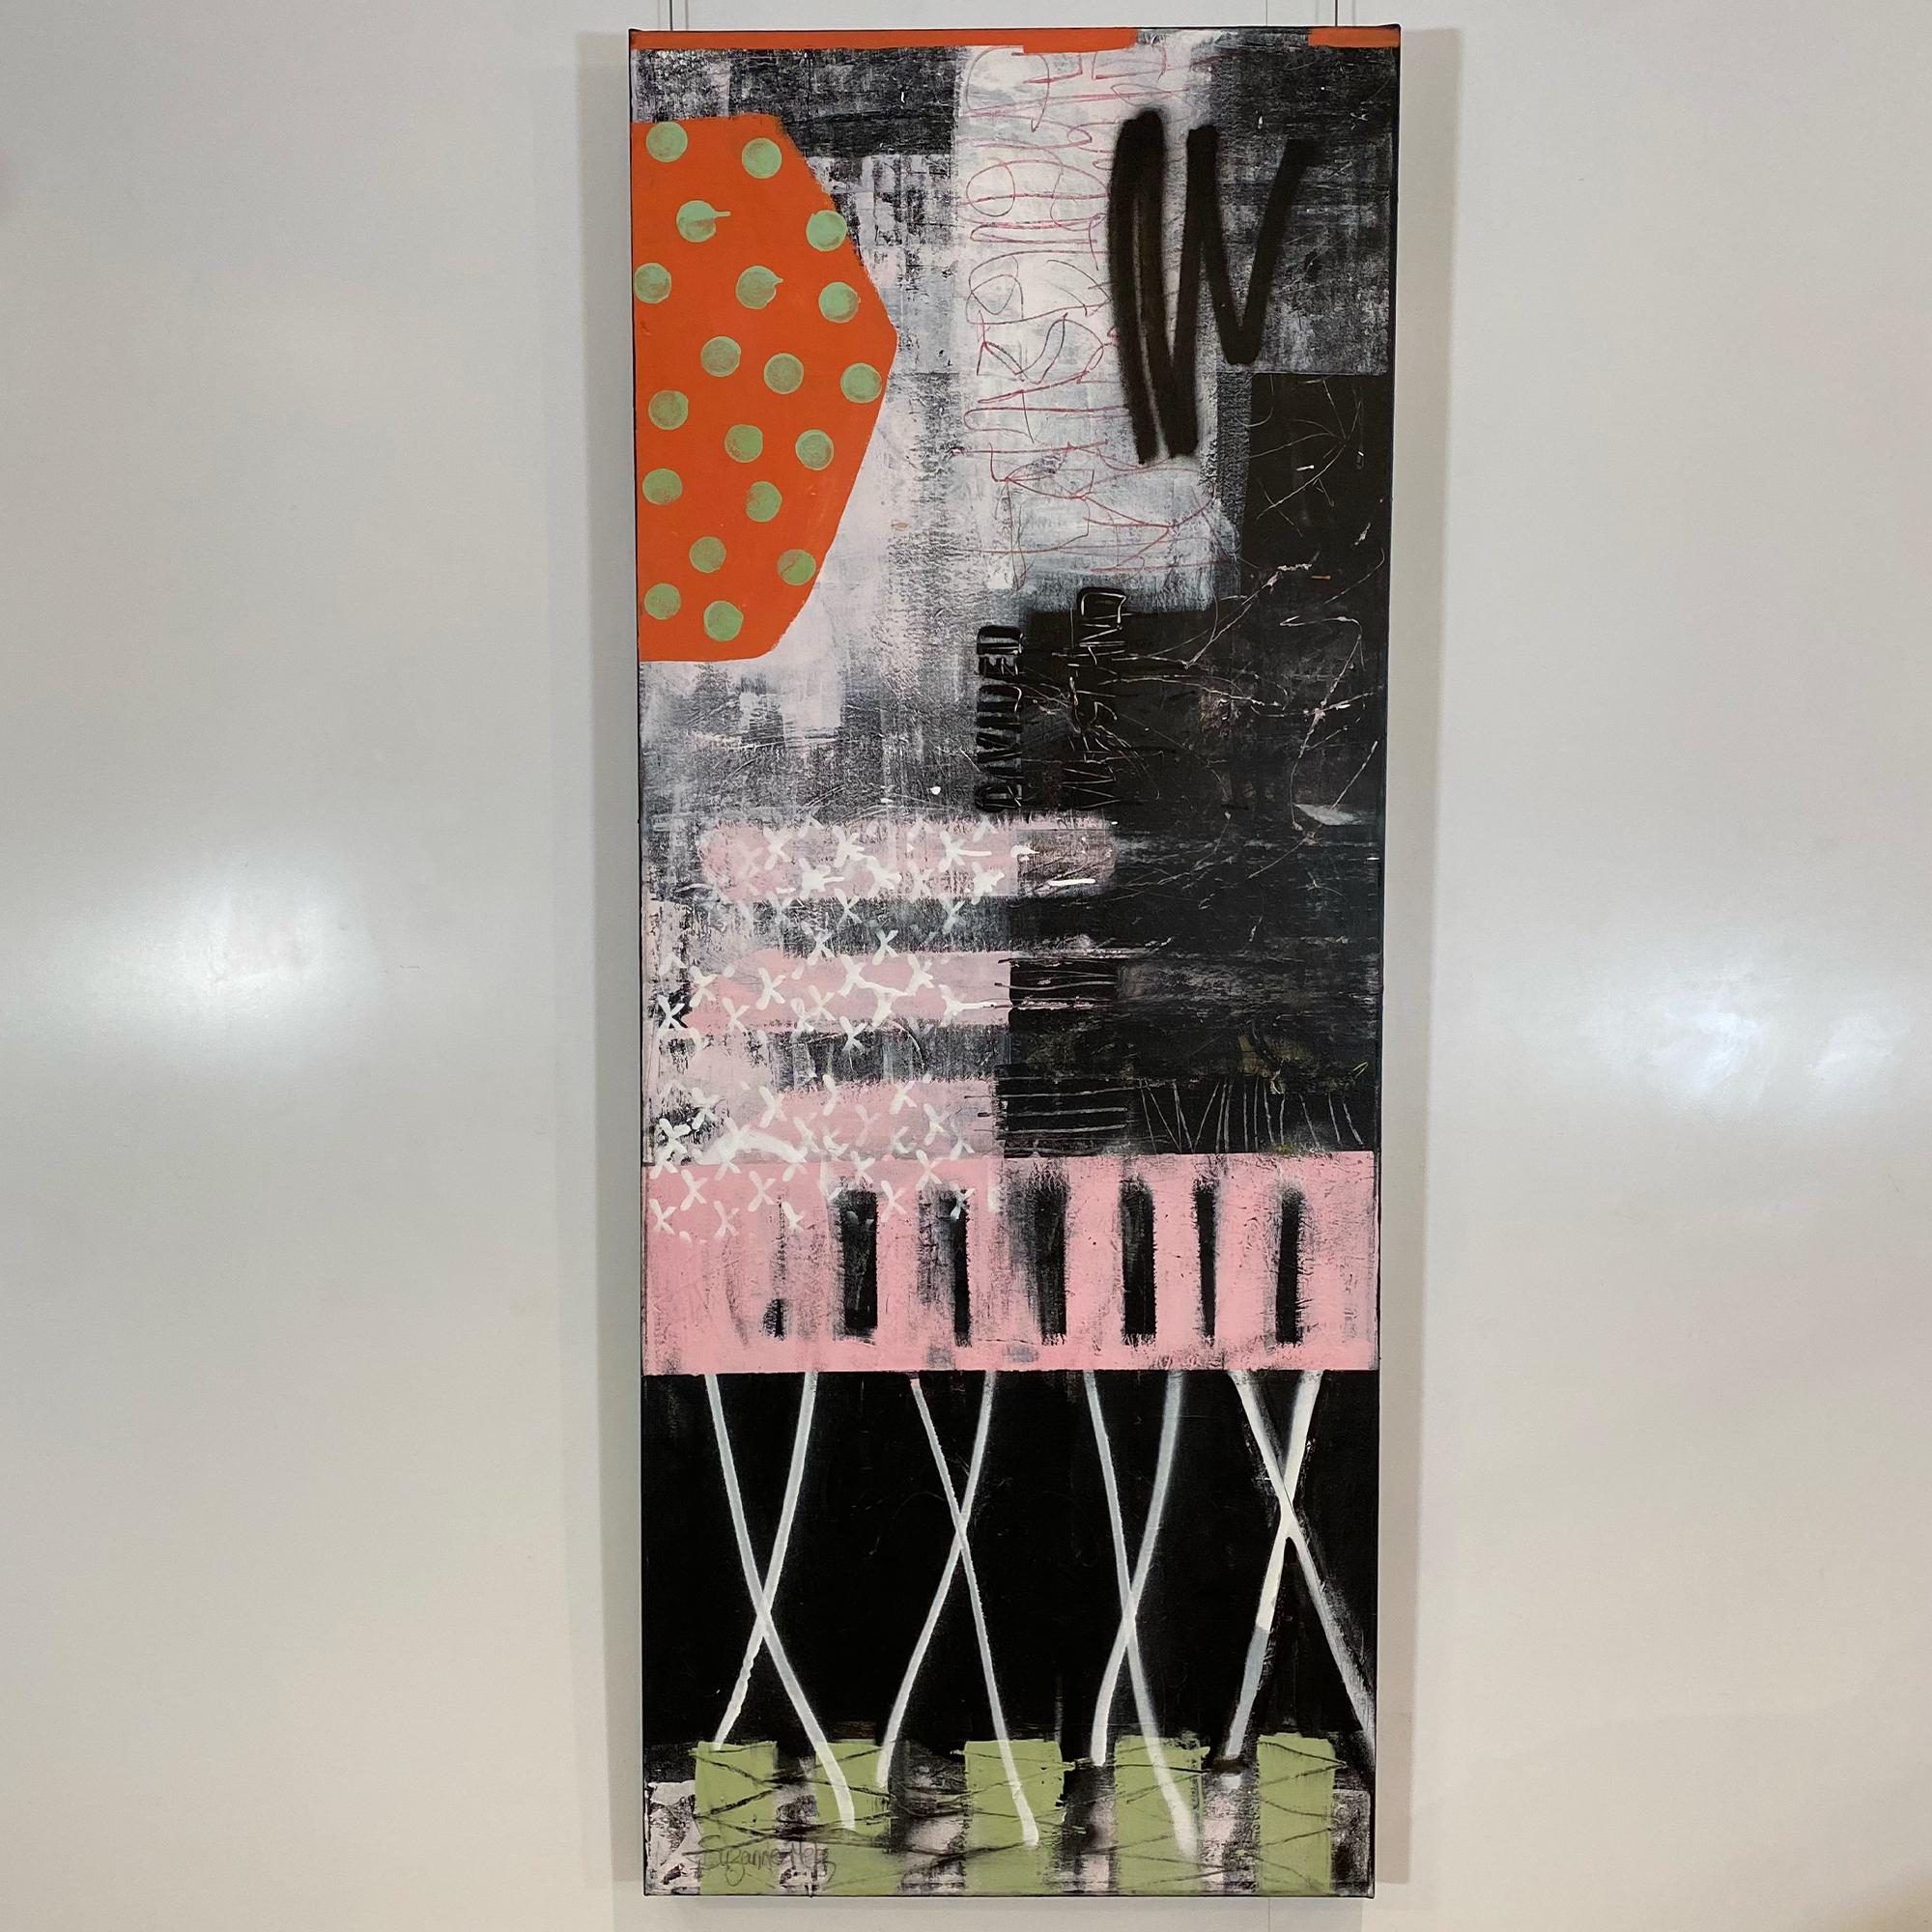 Suzanne Metz Abstract Painting - Divided, 60" x 24", graphic black, white and pink abstract painting on canvas